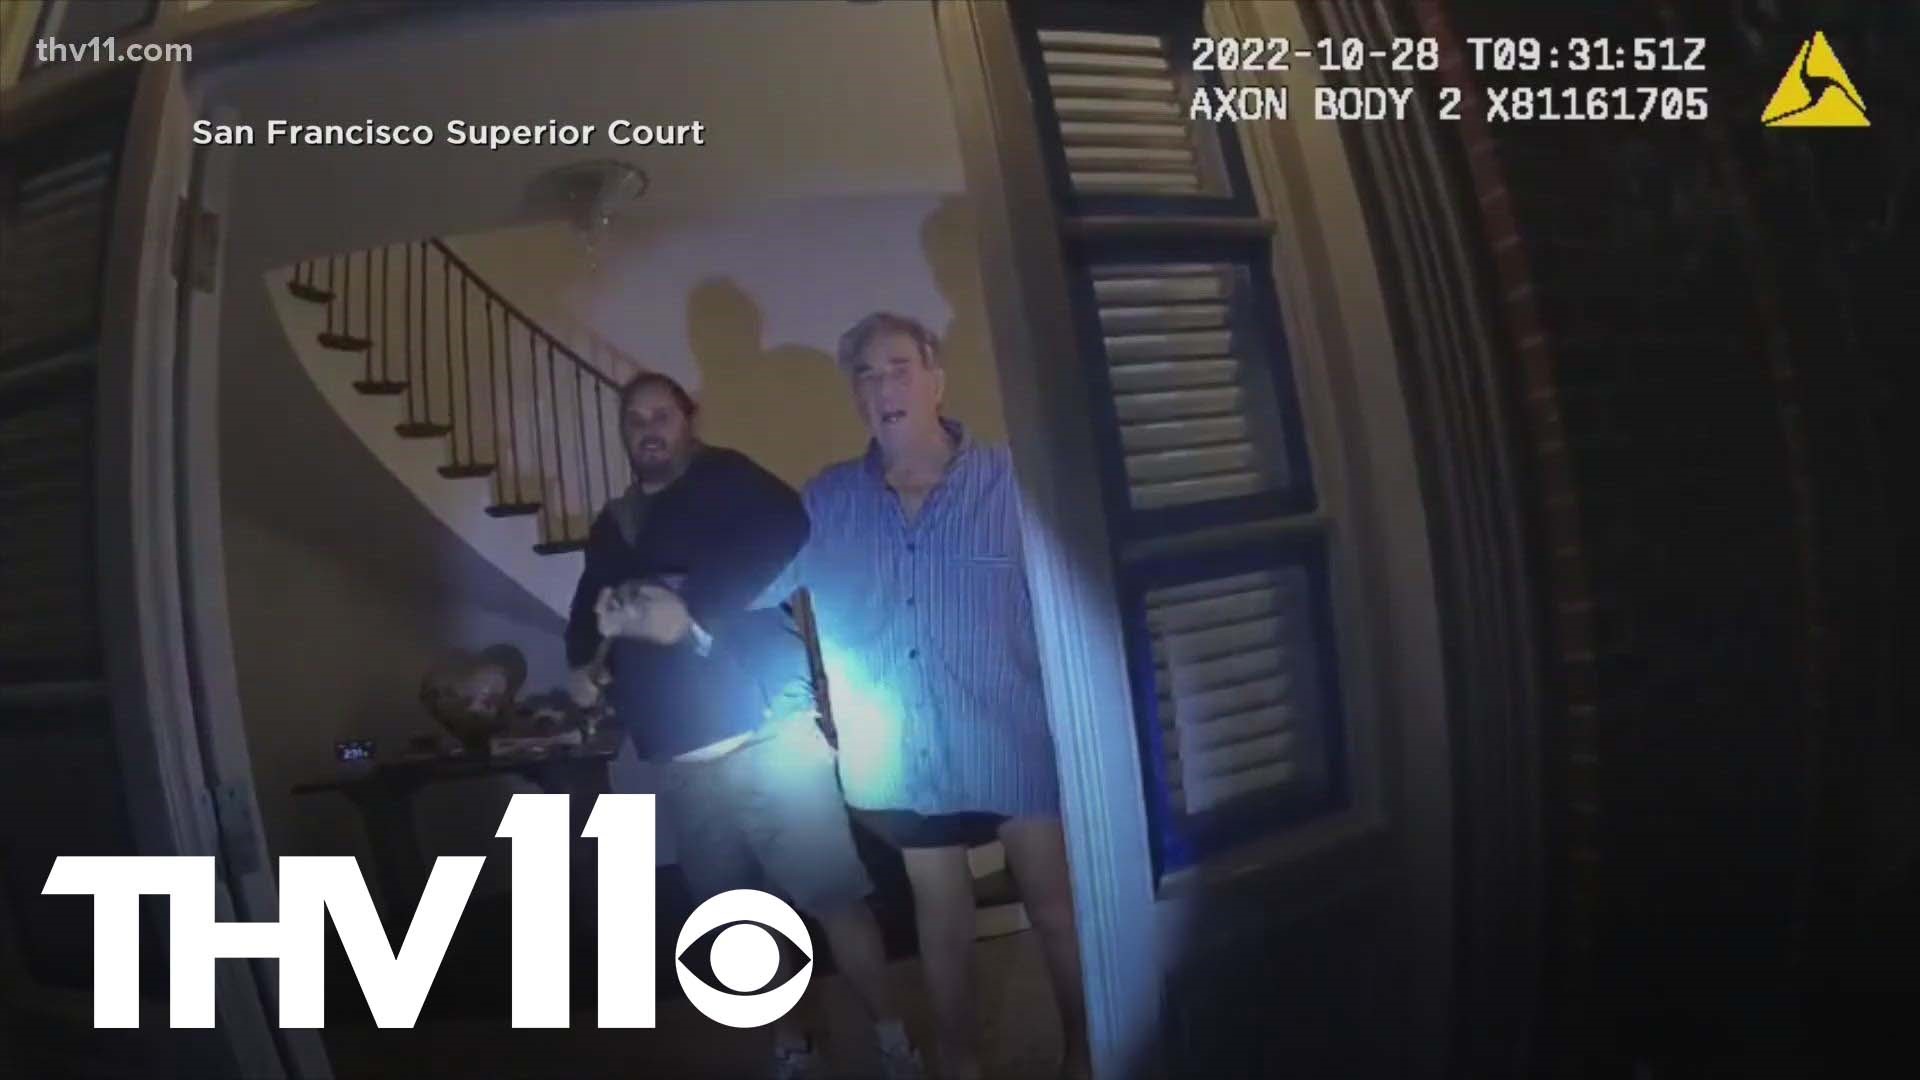 The home security footage shows the suspect, David Depape, smashing a window to get into the home of former House speaker Nancy Pelosi.